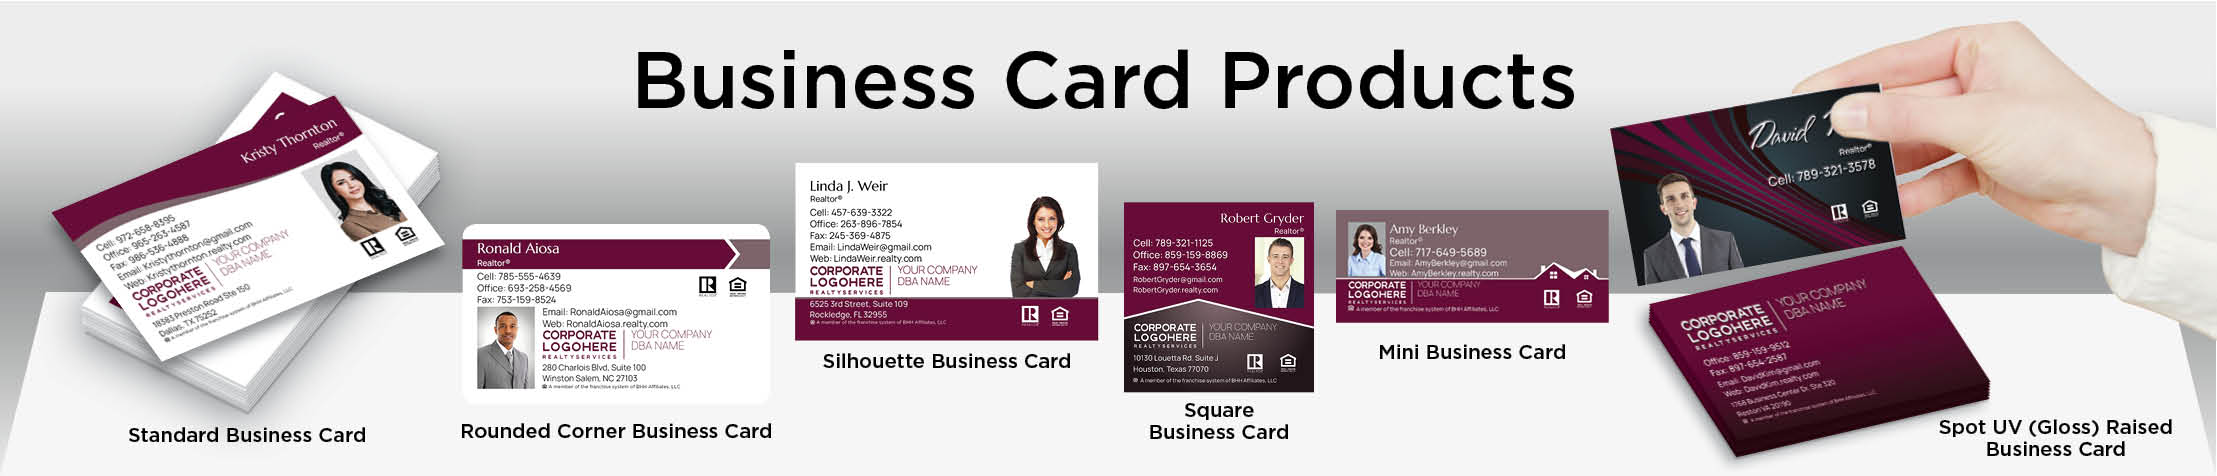 Berkshire Hathaway Real Estate Business Card Products - Berkshire Hathaway  - Unique, Custom Business Cards Printed on Quality Stock with Creative Designs for Realtors | BestPrintBuy.com